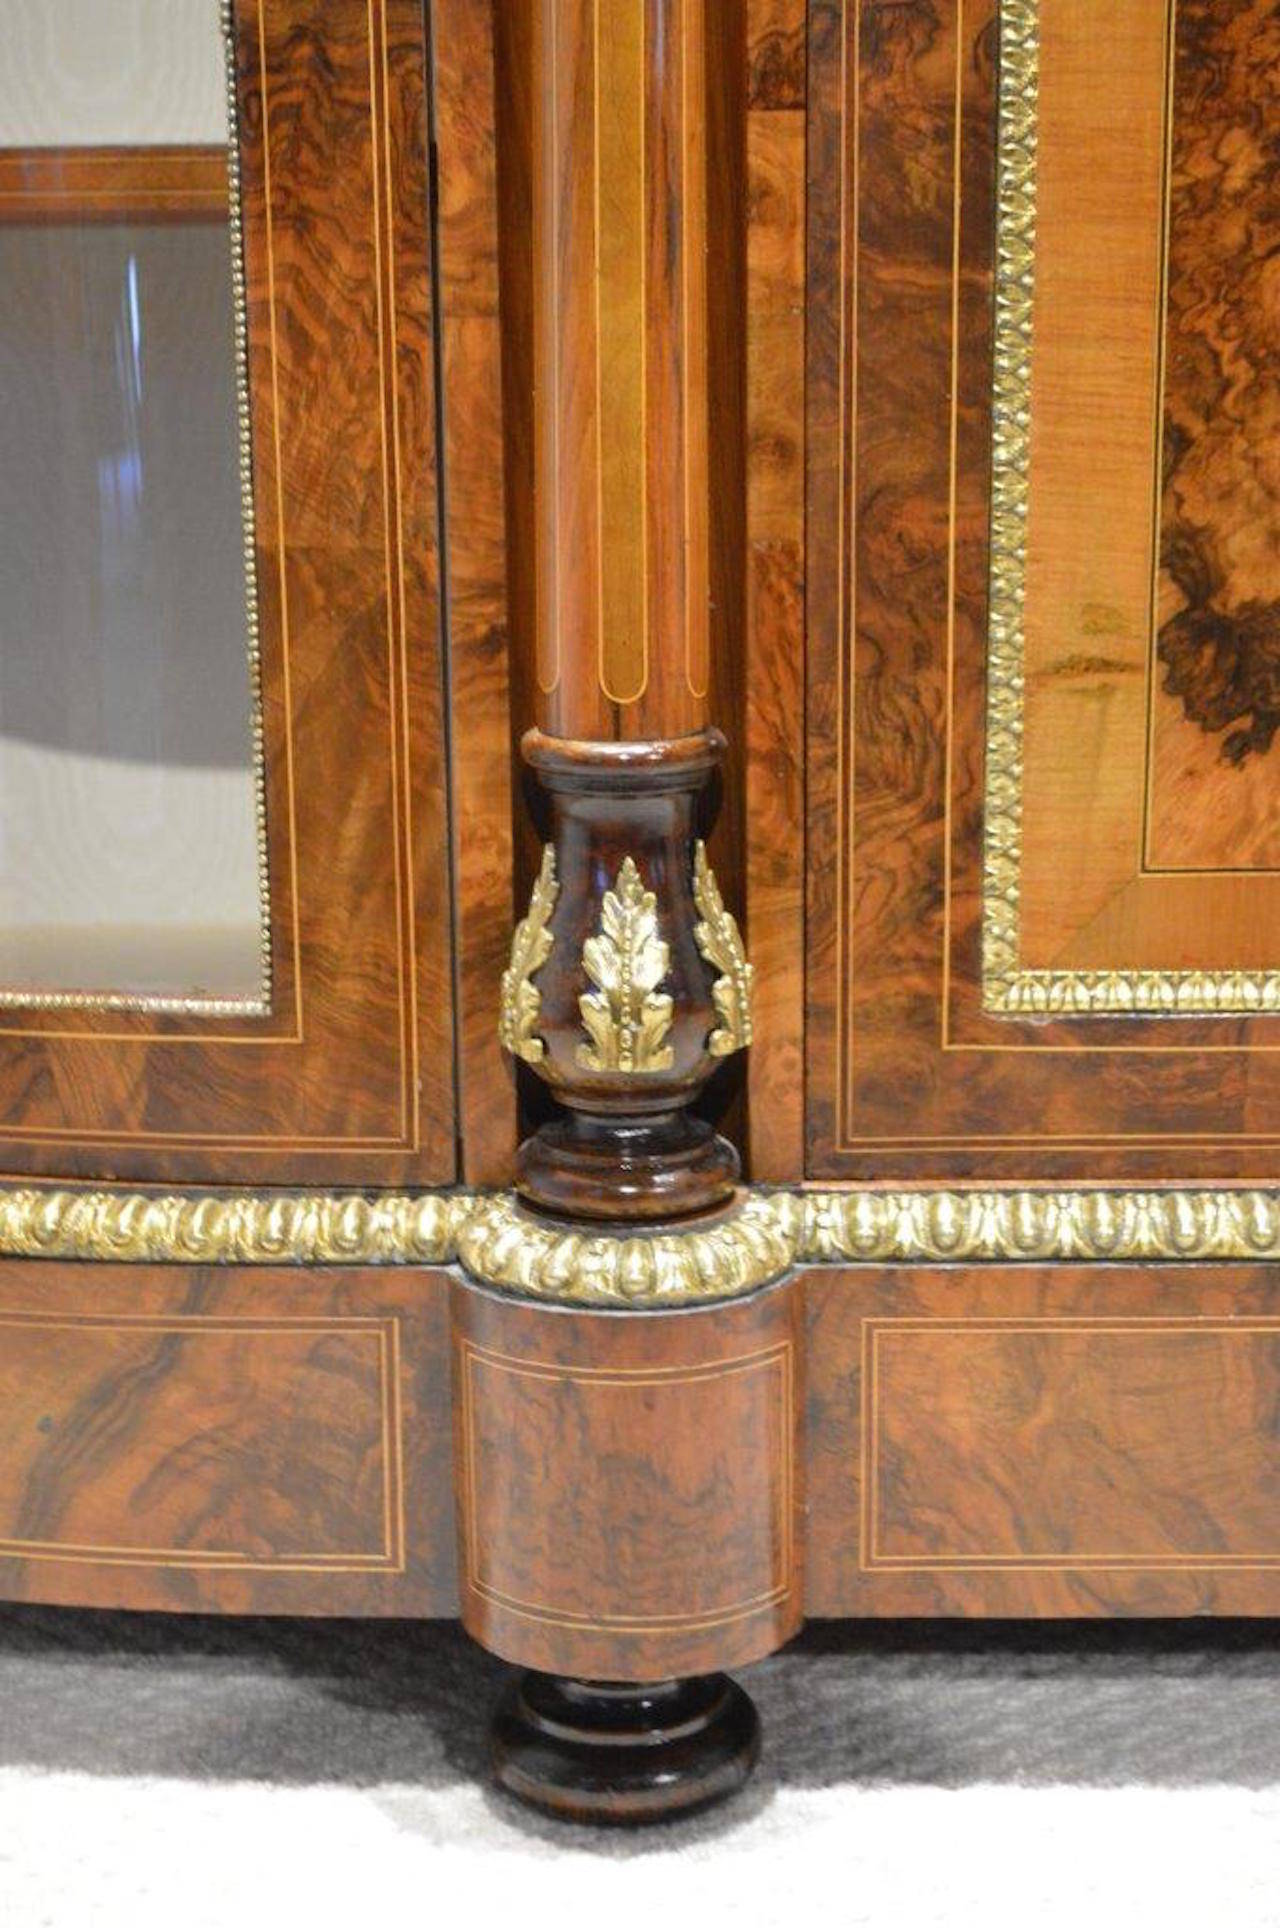 A stunning burr walnut & marquetry inlaid Victorian Period antique credenza. Having a D shaped top veneered in finely figured burr walnut with purple heart banding above an amboyna, sycamore and purple heart frieze with foliate marquetry inlaid